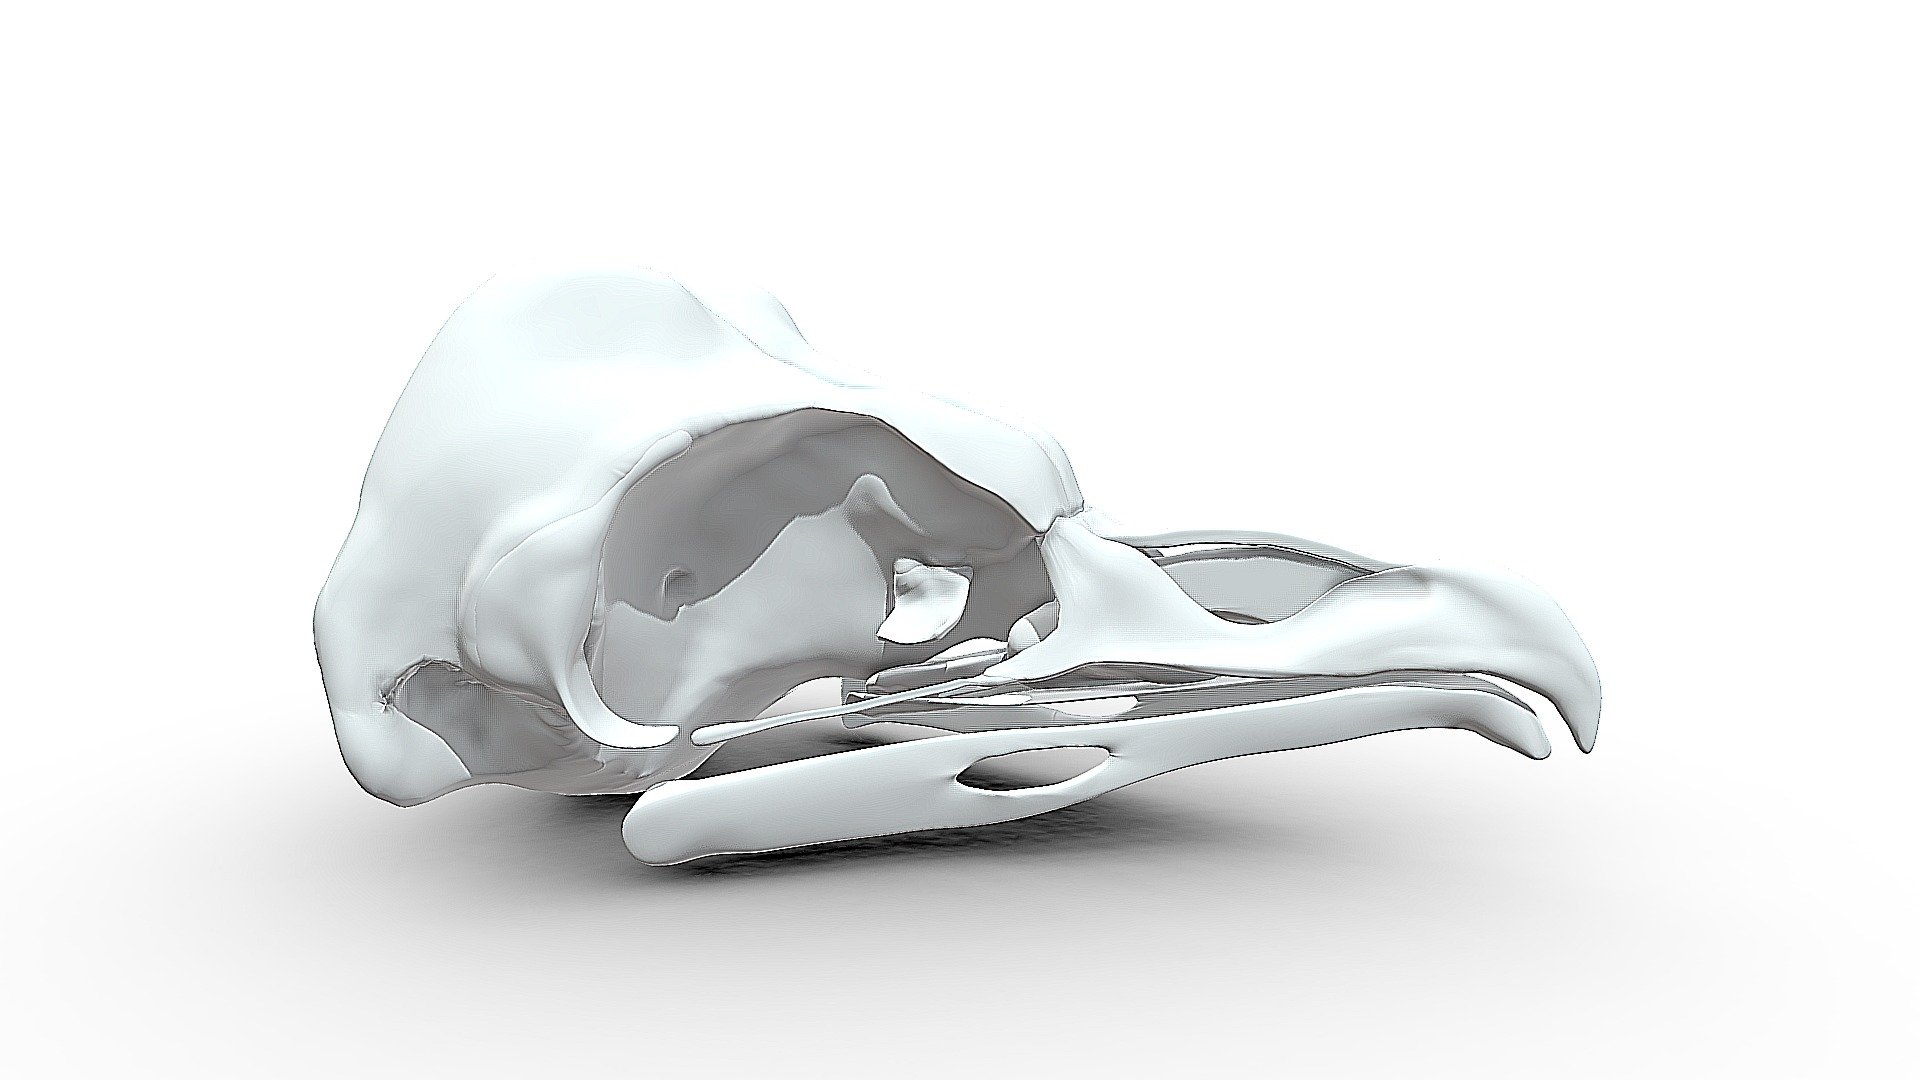 A long, long time ago (2008) I made this owl skull based on the skull of a specimen I got from a colleague. When I have time I am going to retopologize this one and combine it with foto's and text on my website.
The skull you see here is strait from that time, no adjustments made. I know I can make it a lot more efficient now ;-) - Barn owl skull - 3D model by Mieke Roth (@miekeroth) 3d model